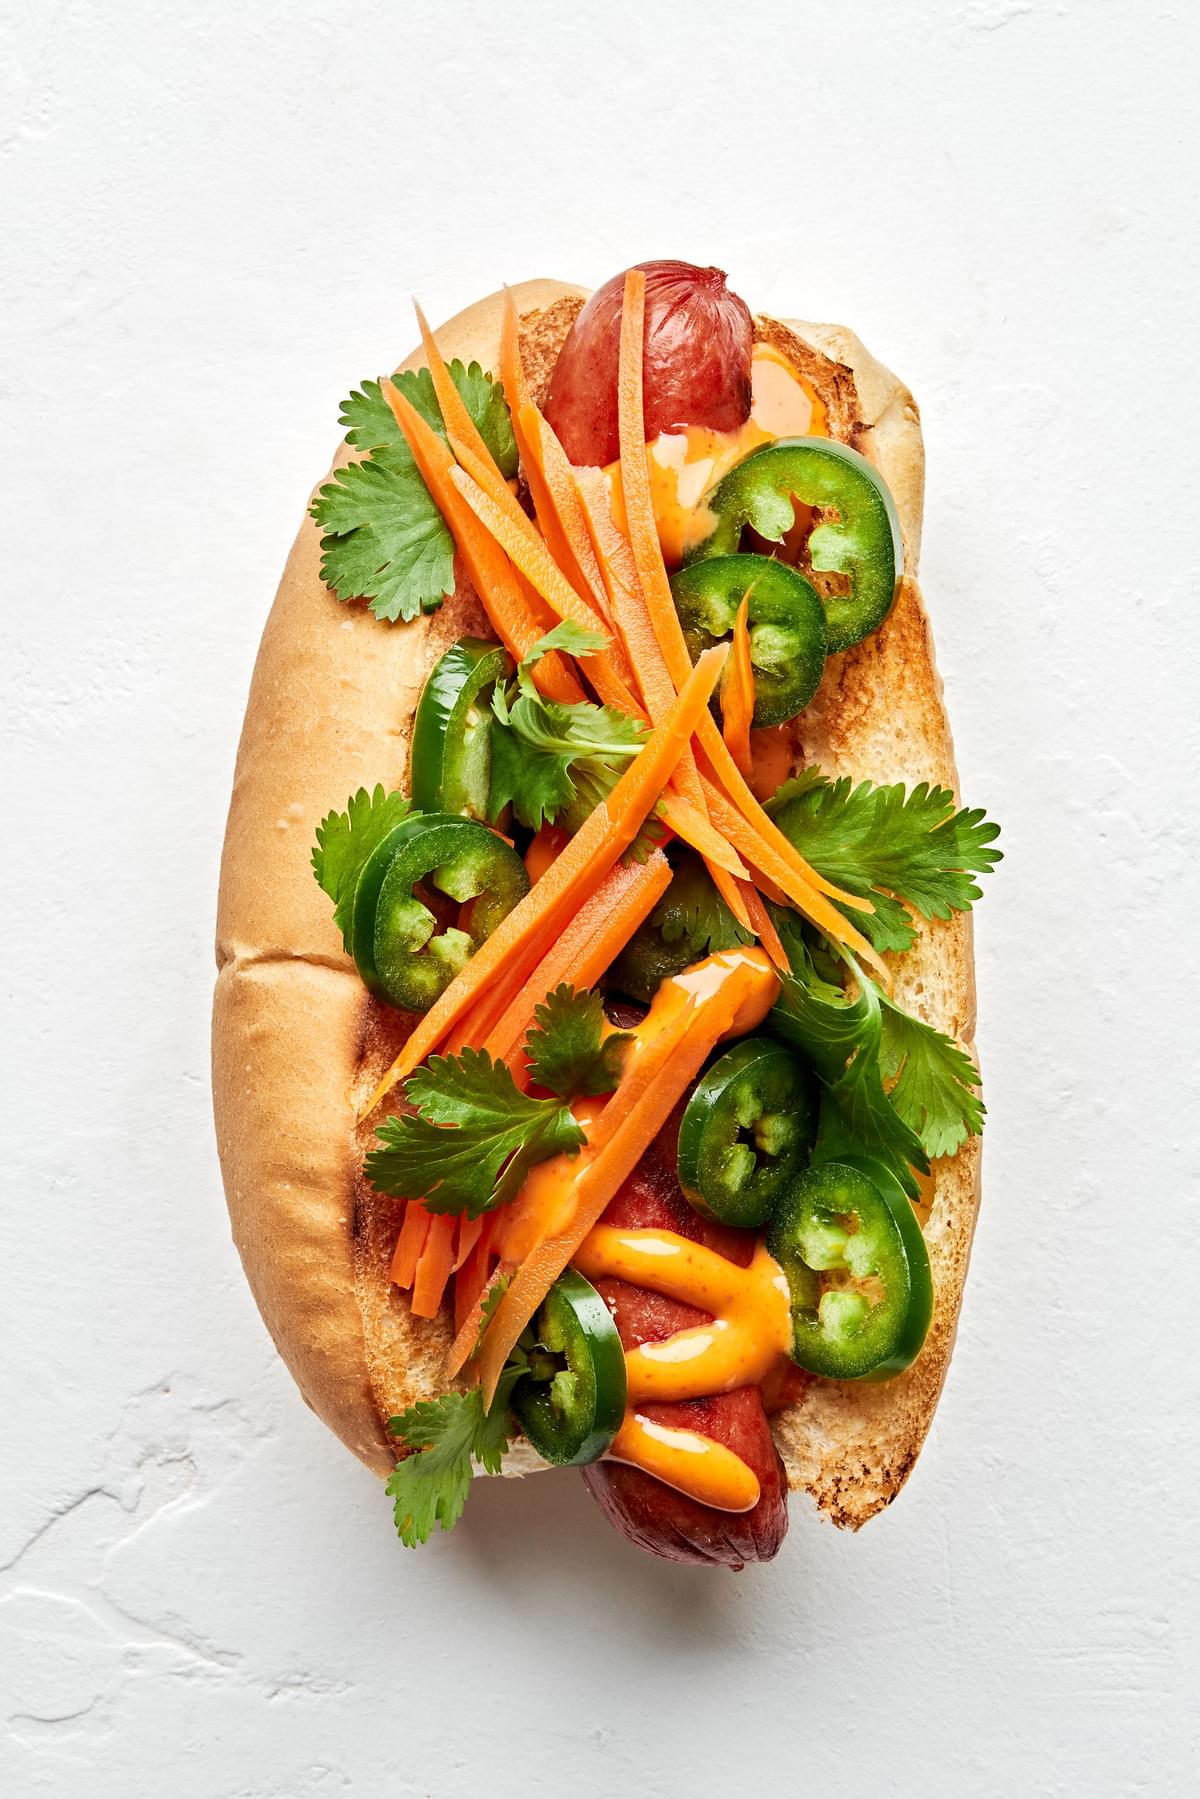 A banh mi hot dog topped with Sriracha mayo, jalapeño, pickled carrots, and cilantro.